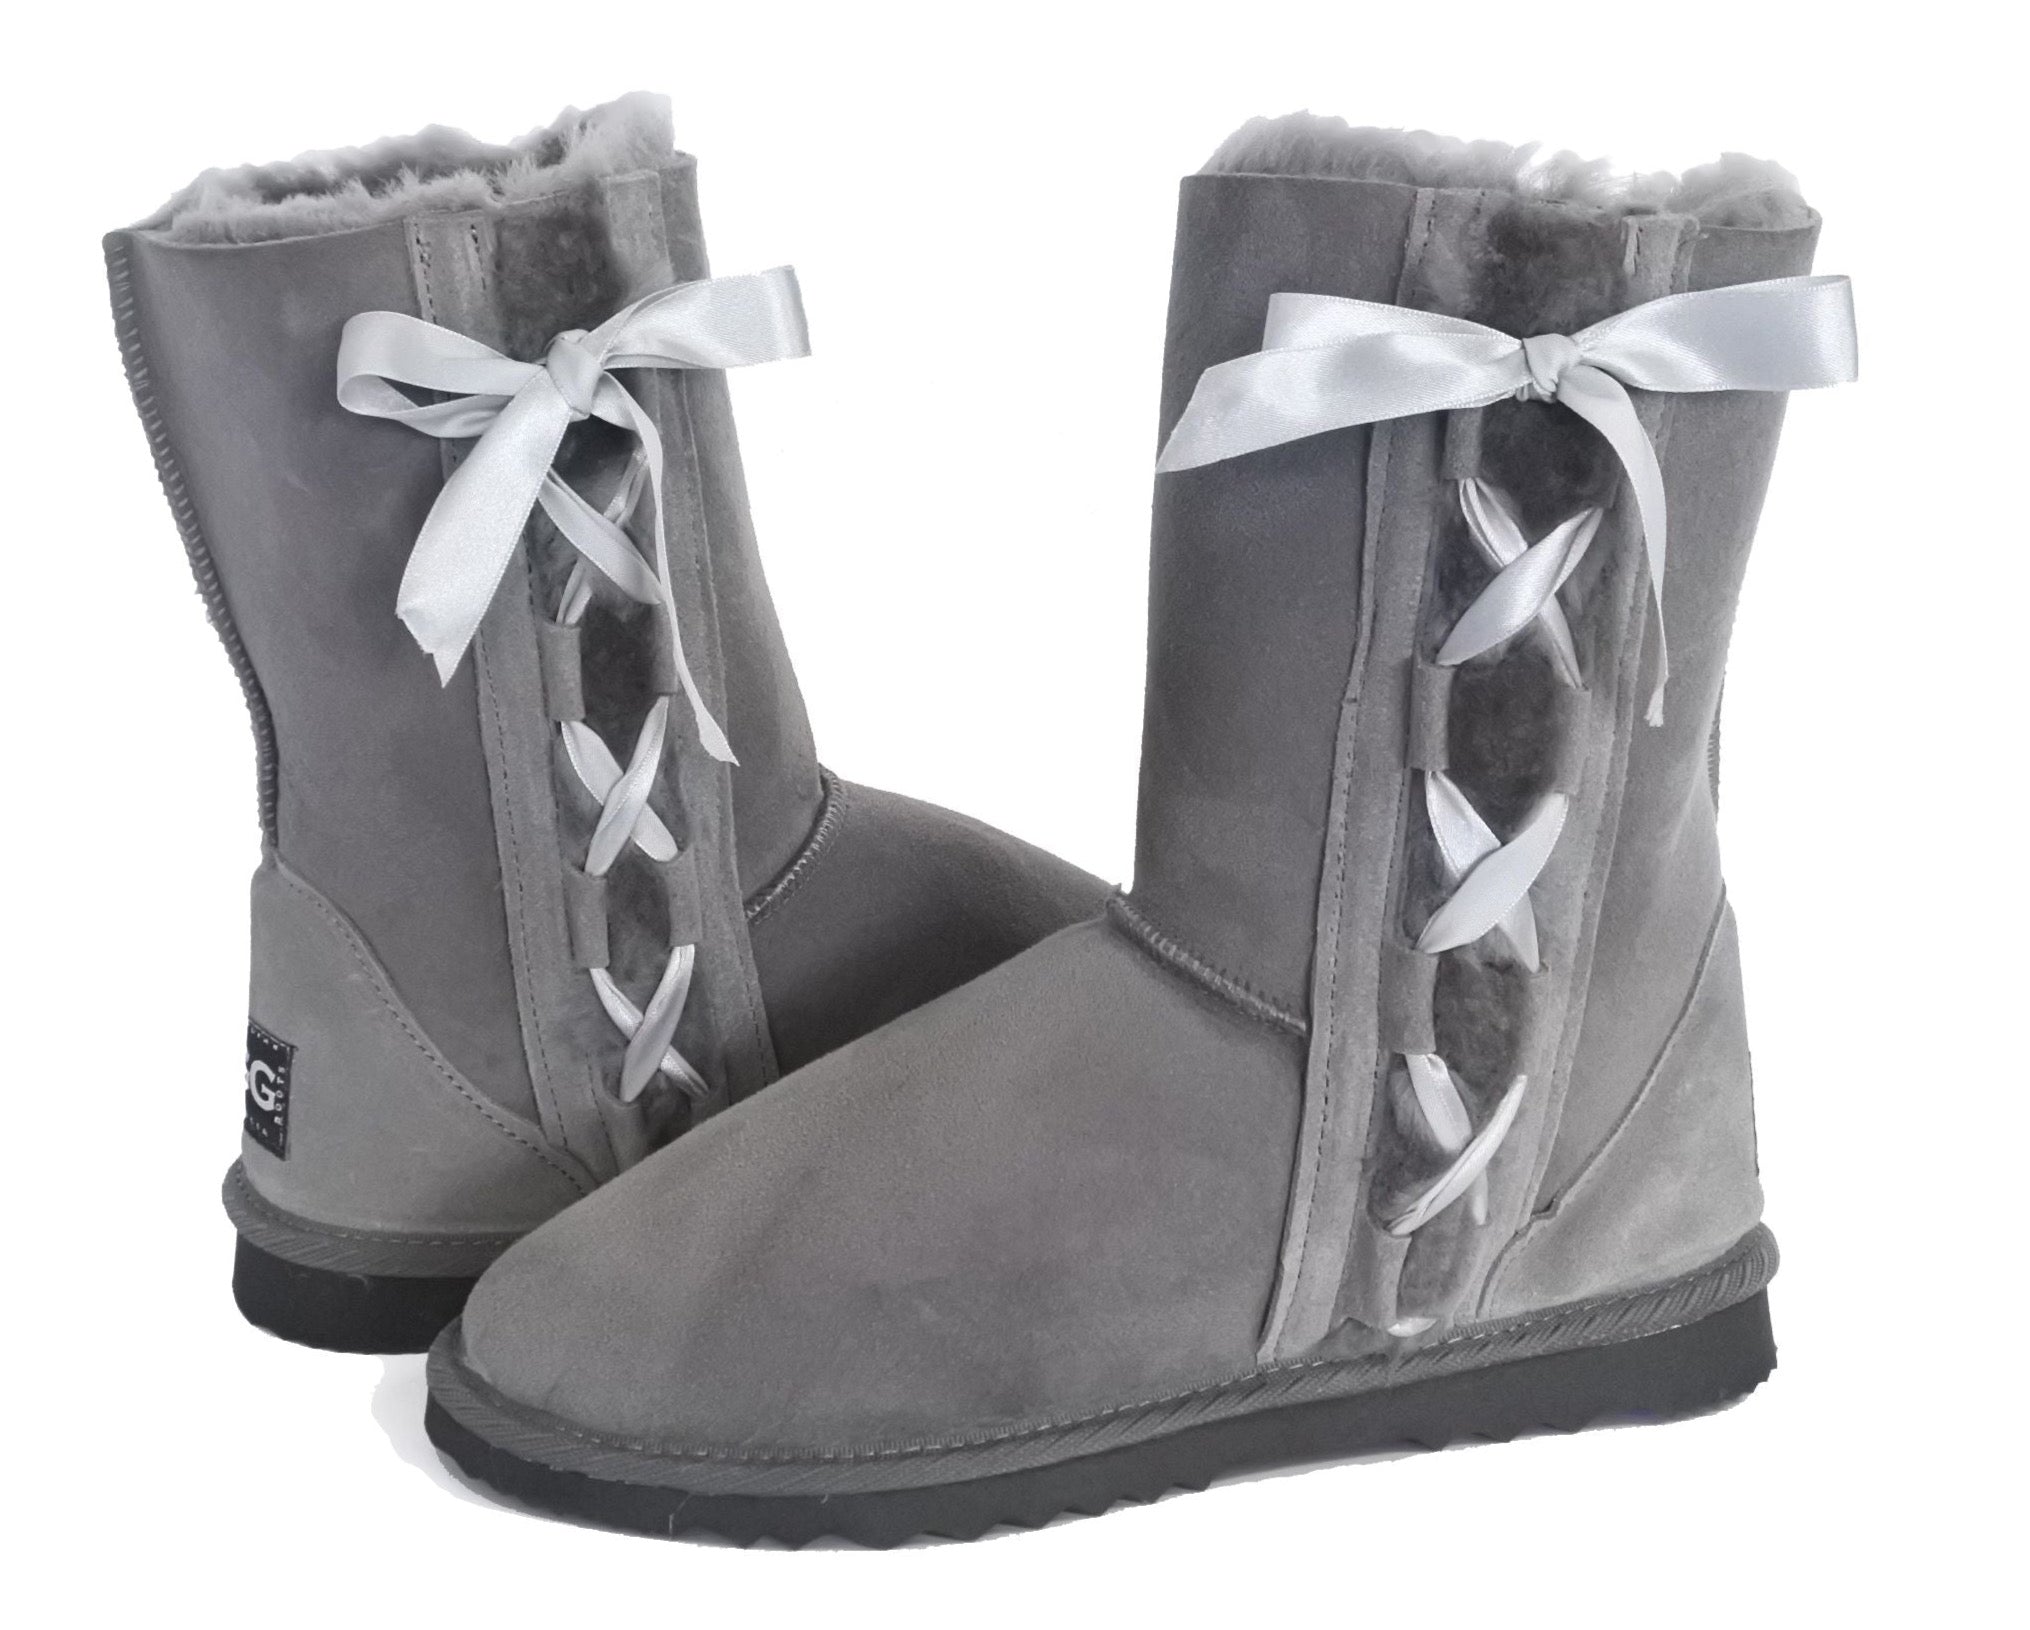 WOMEN'S XBOW BOOTS